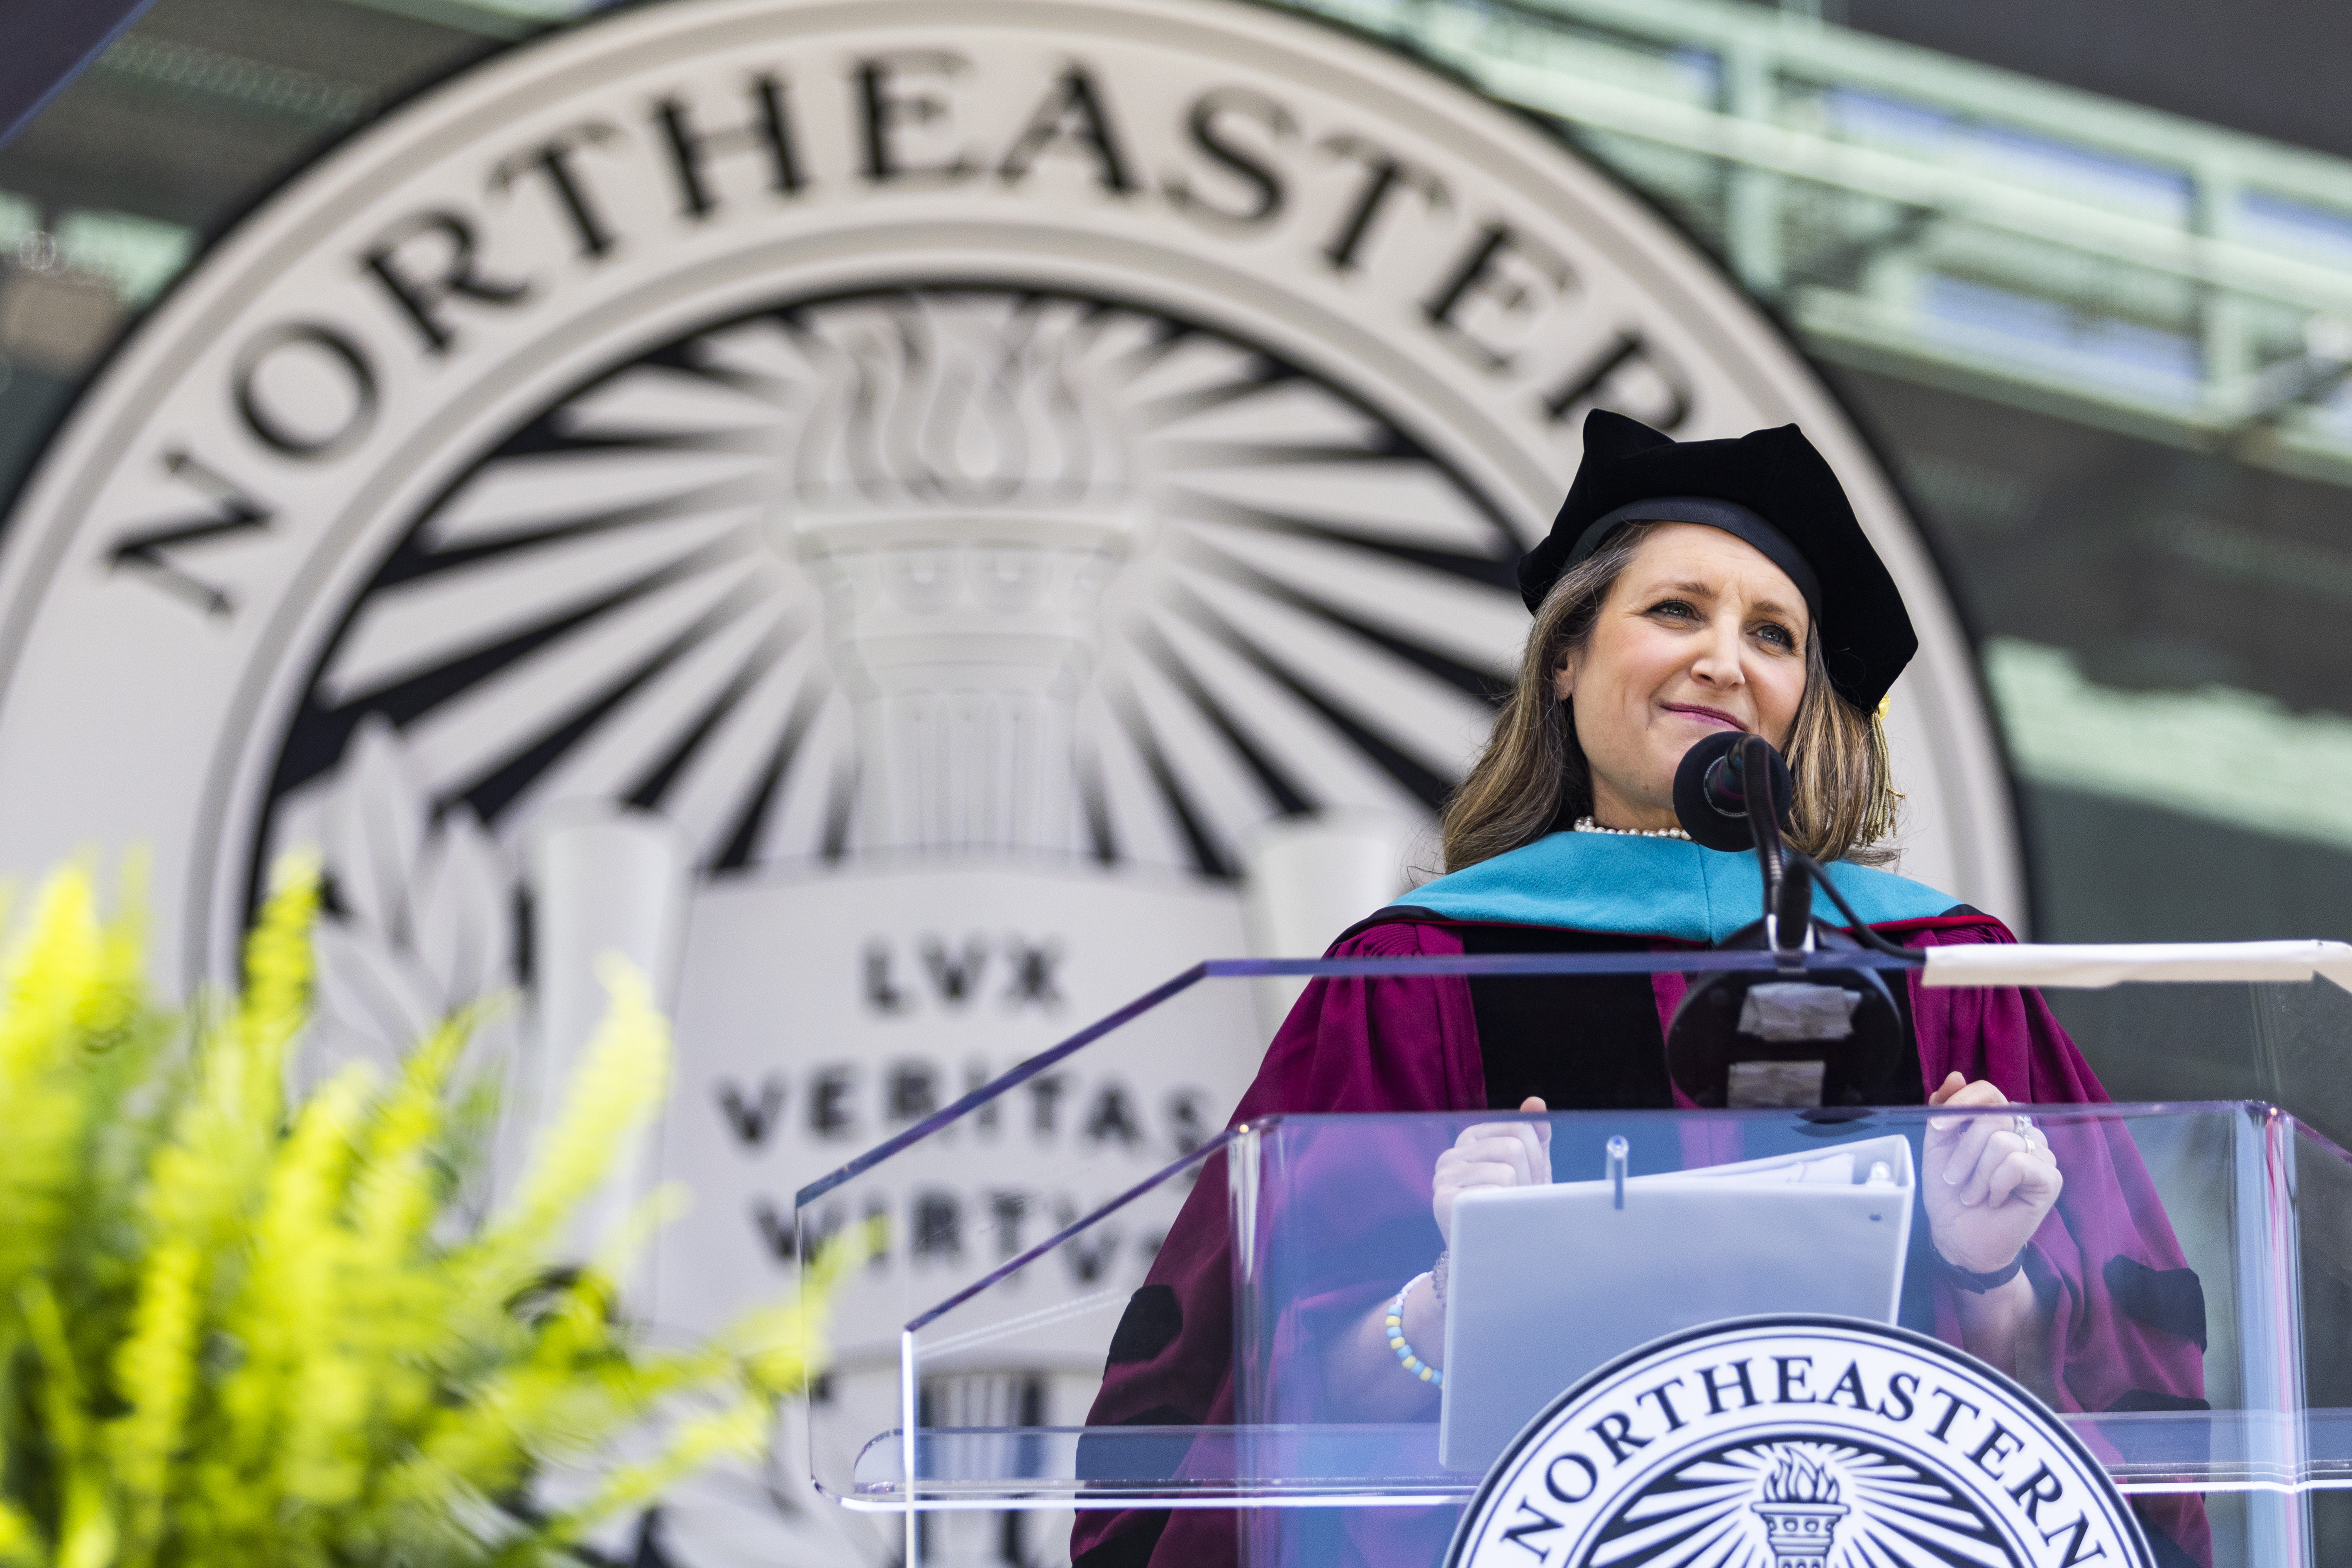 Chrystia Freeland at the commencement podium.